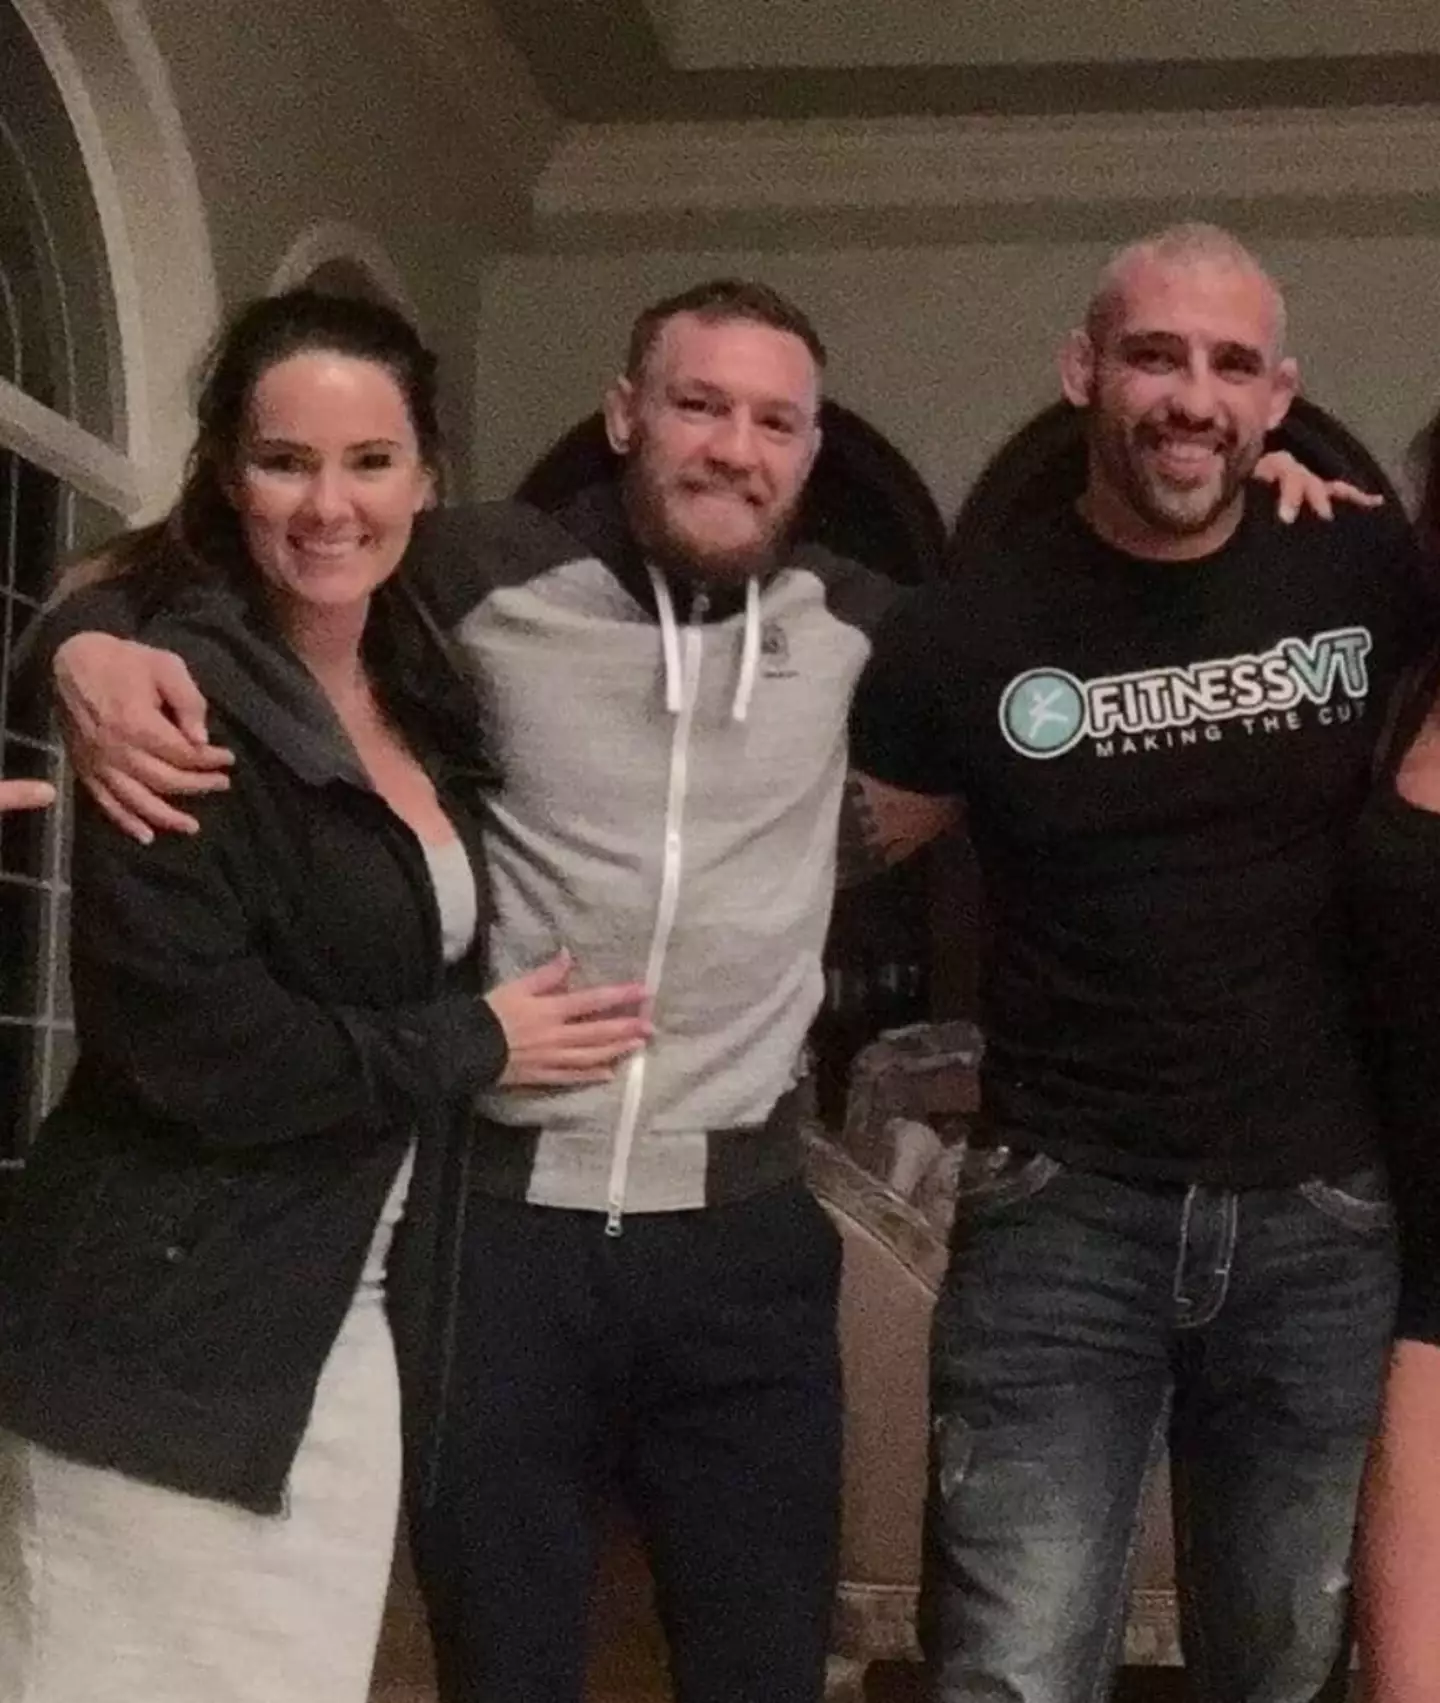 George Lockhart pictured with Conor McGregor and his parter, Dee Devlin. (lockloadedmma/Instagram)